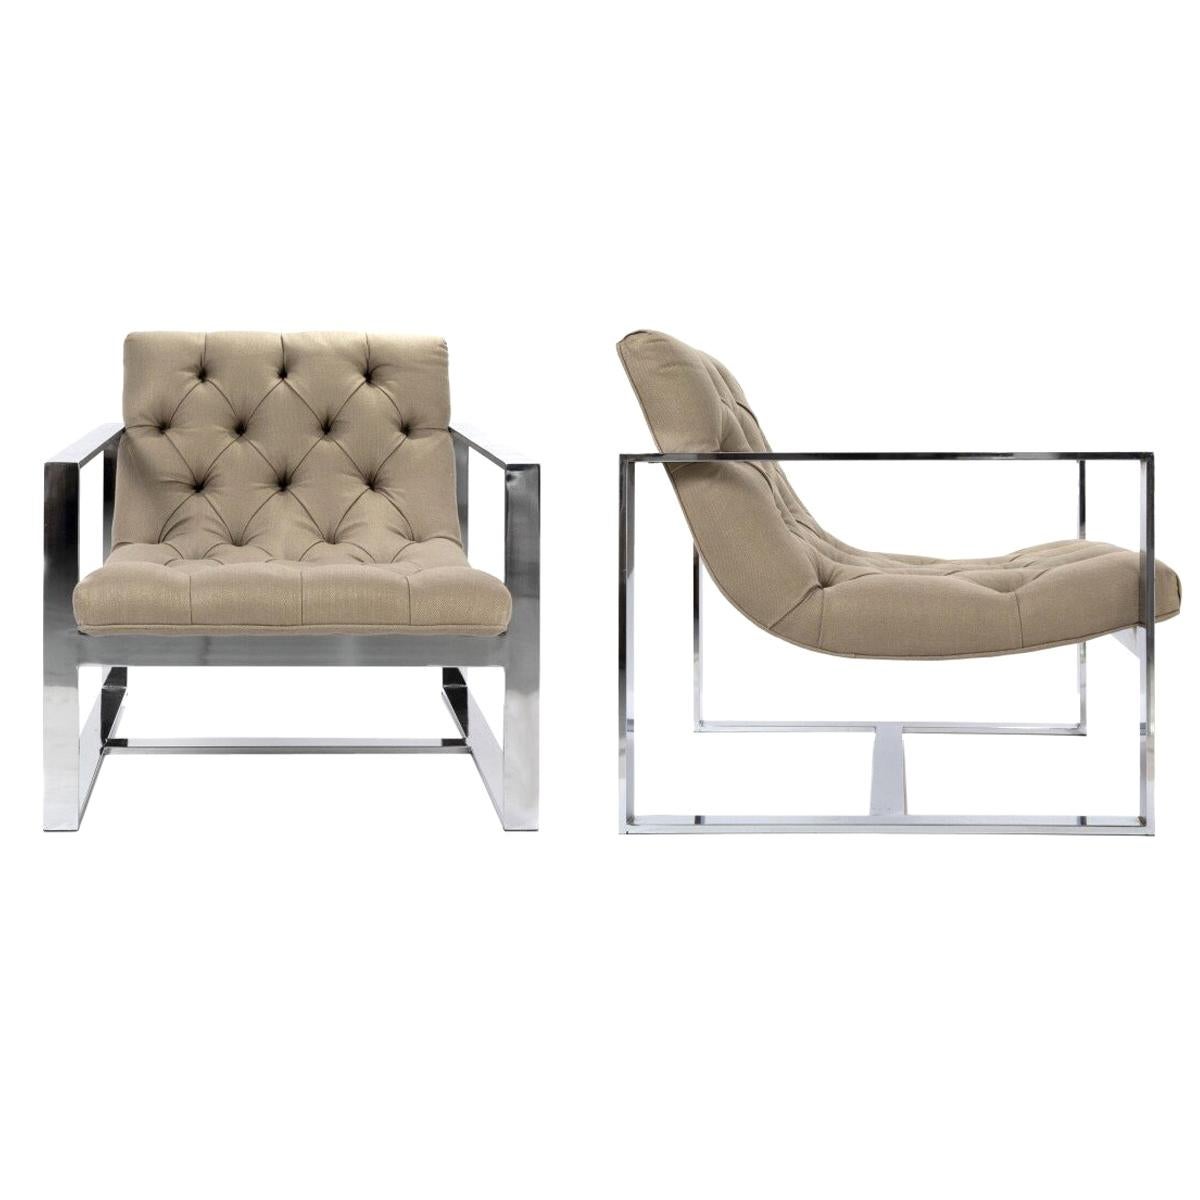 Pair of Contemporary Chrome Armchairs in Taupe Tufted Upholstery